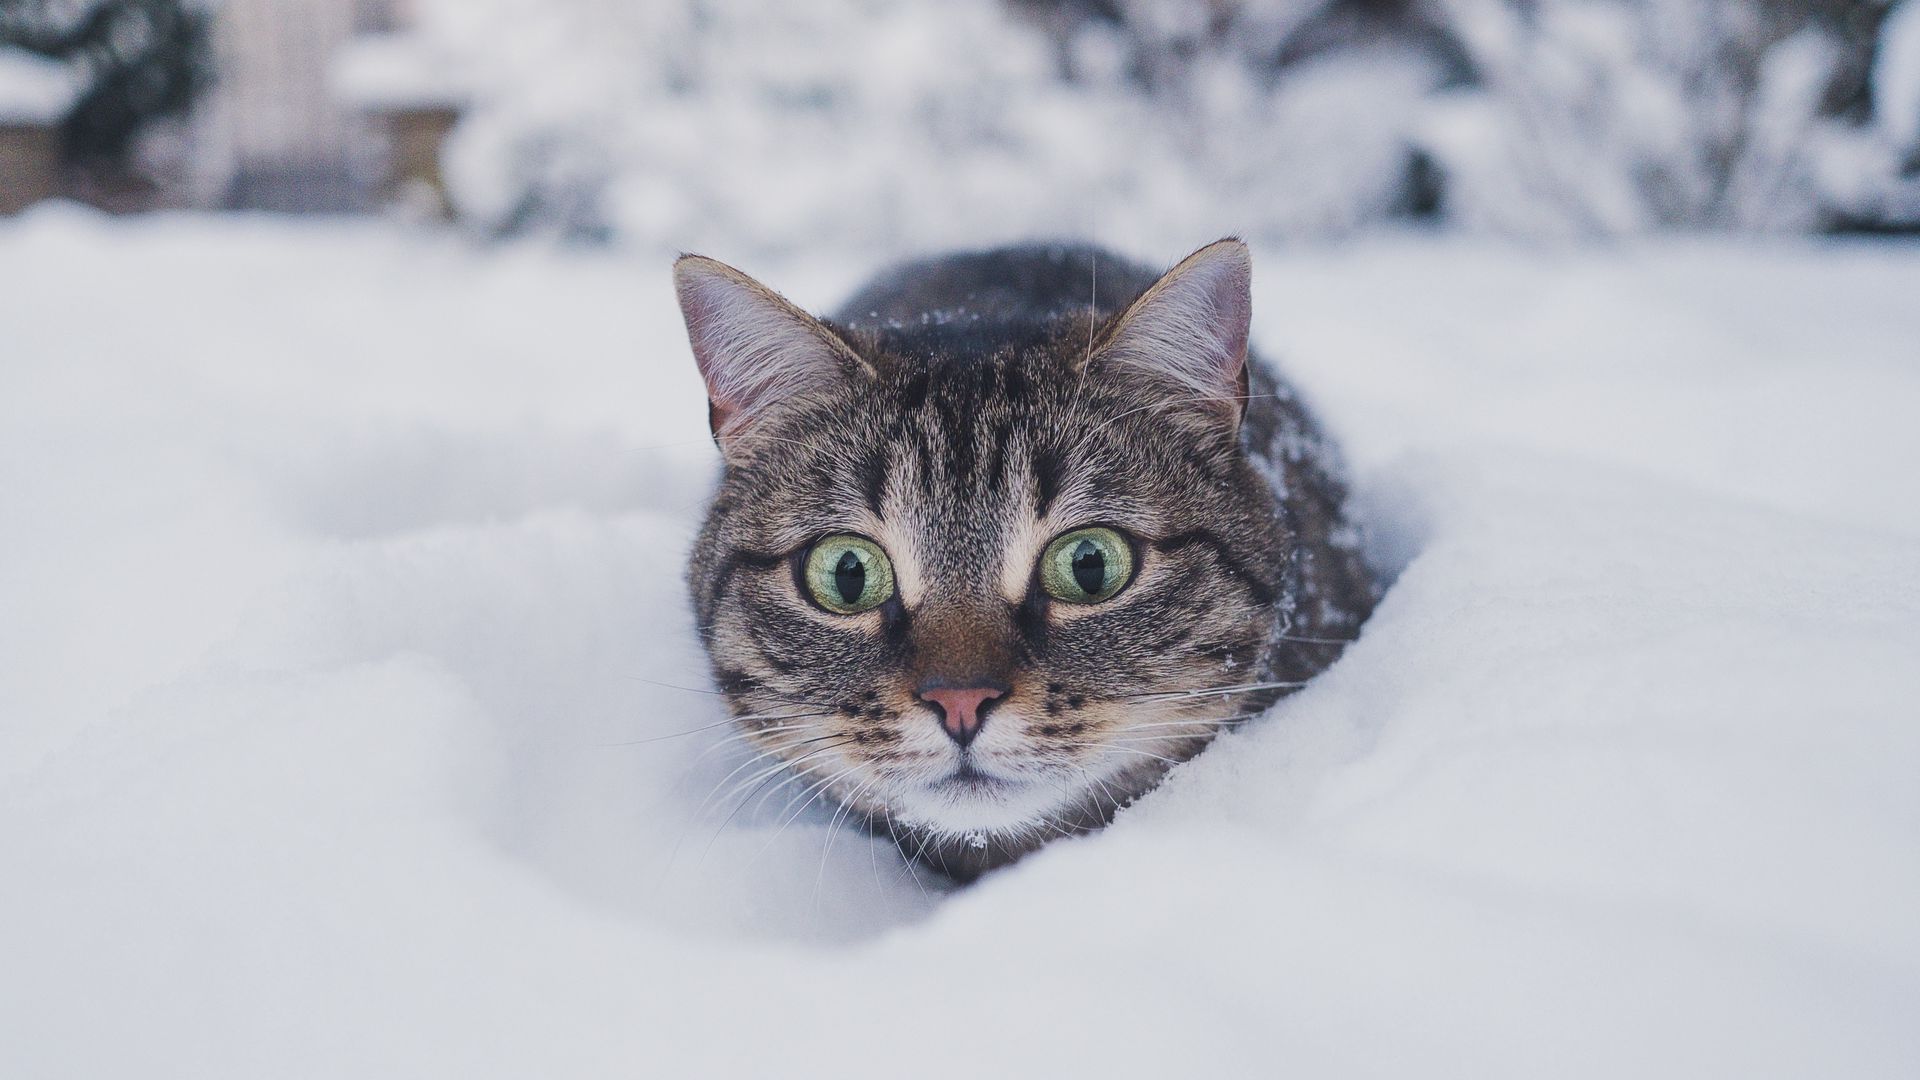 Download wallpaper 1920x1080 cat, pet, funny, glance, snow, winter full hd,  hdtv, fhd, 1080p hd background